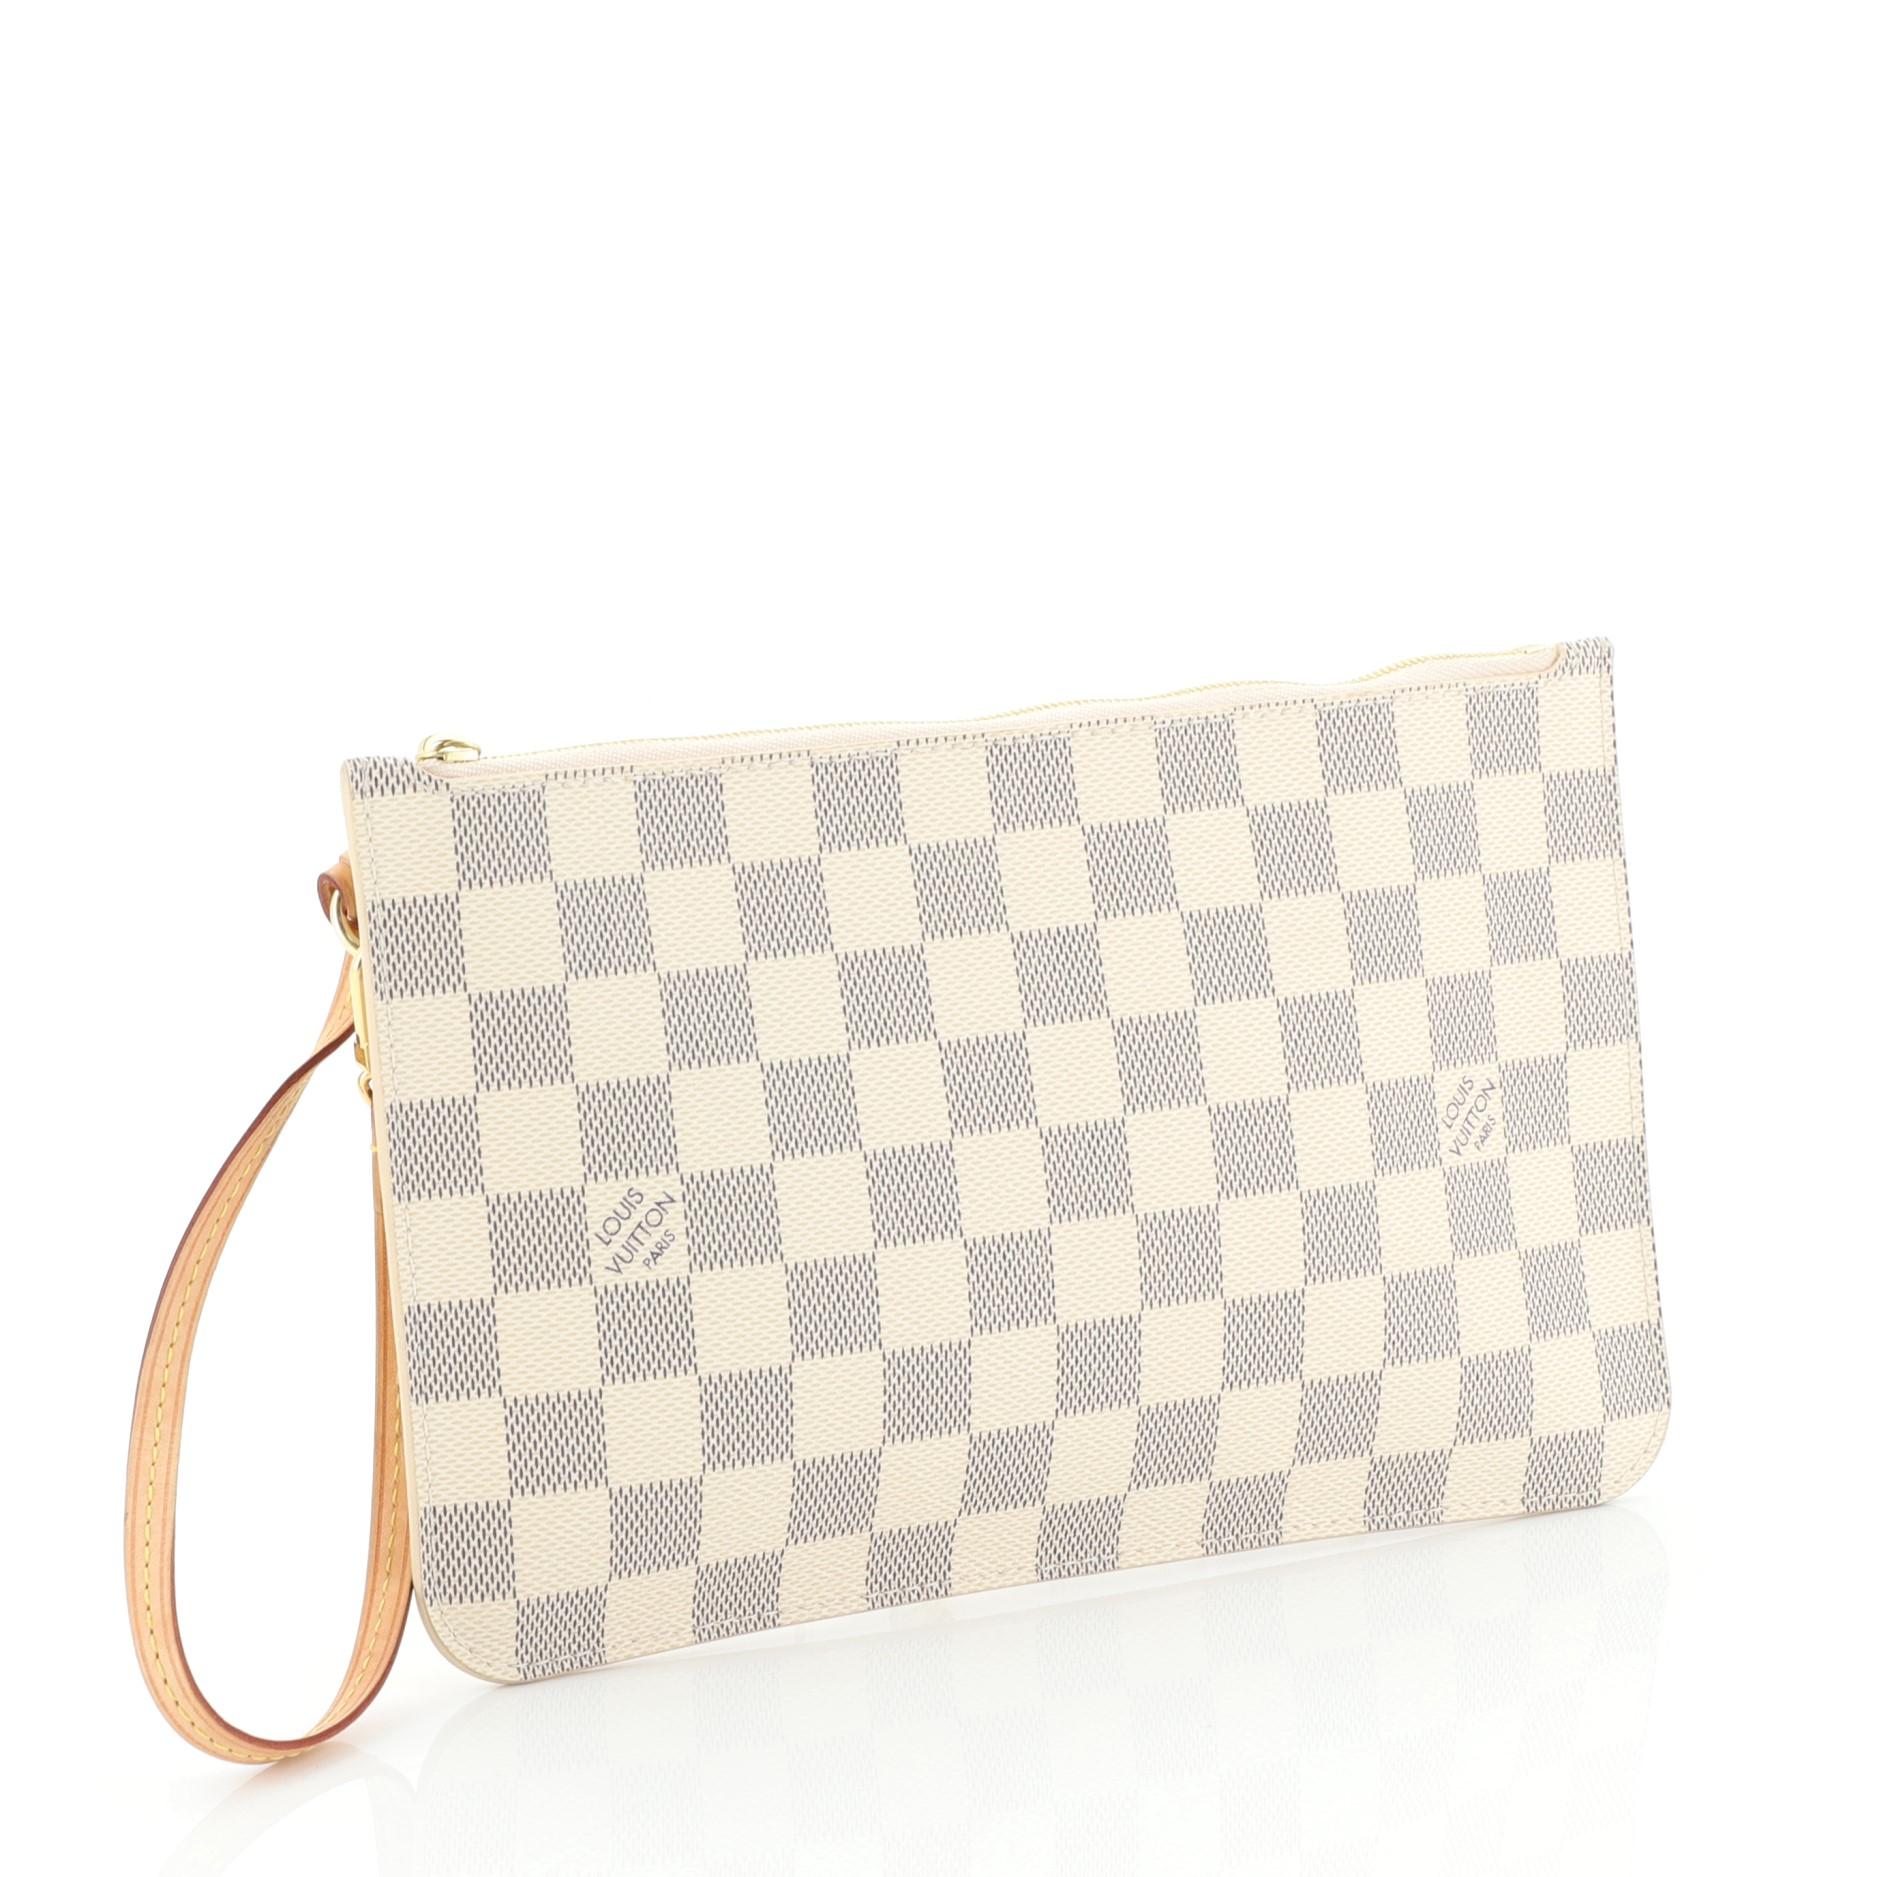 This Louis Vuitton Neverfull Pochette Damier Large, crafted from damier azur coated canvas, features leather strap and gold-tone hardware. Its zip closure opens to a white fabric interior with slip pocket. Authenticity code reads: FL4168.